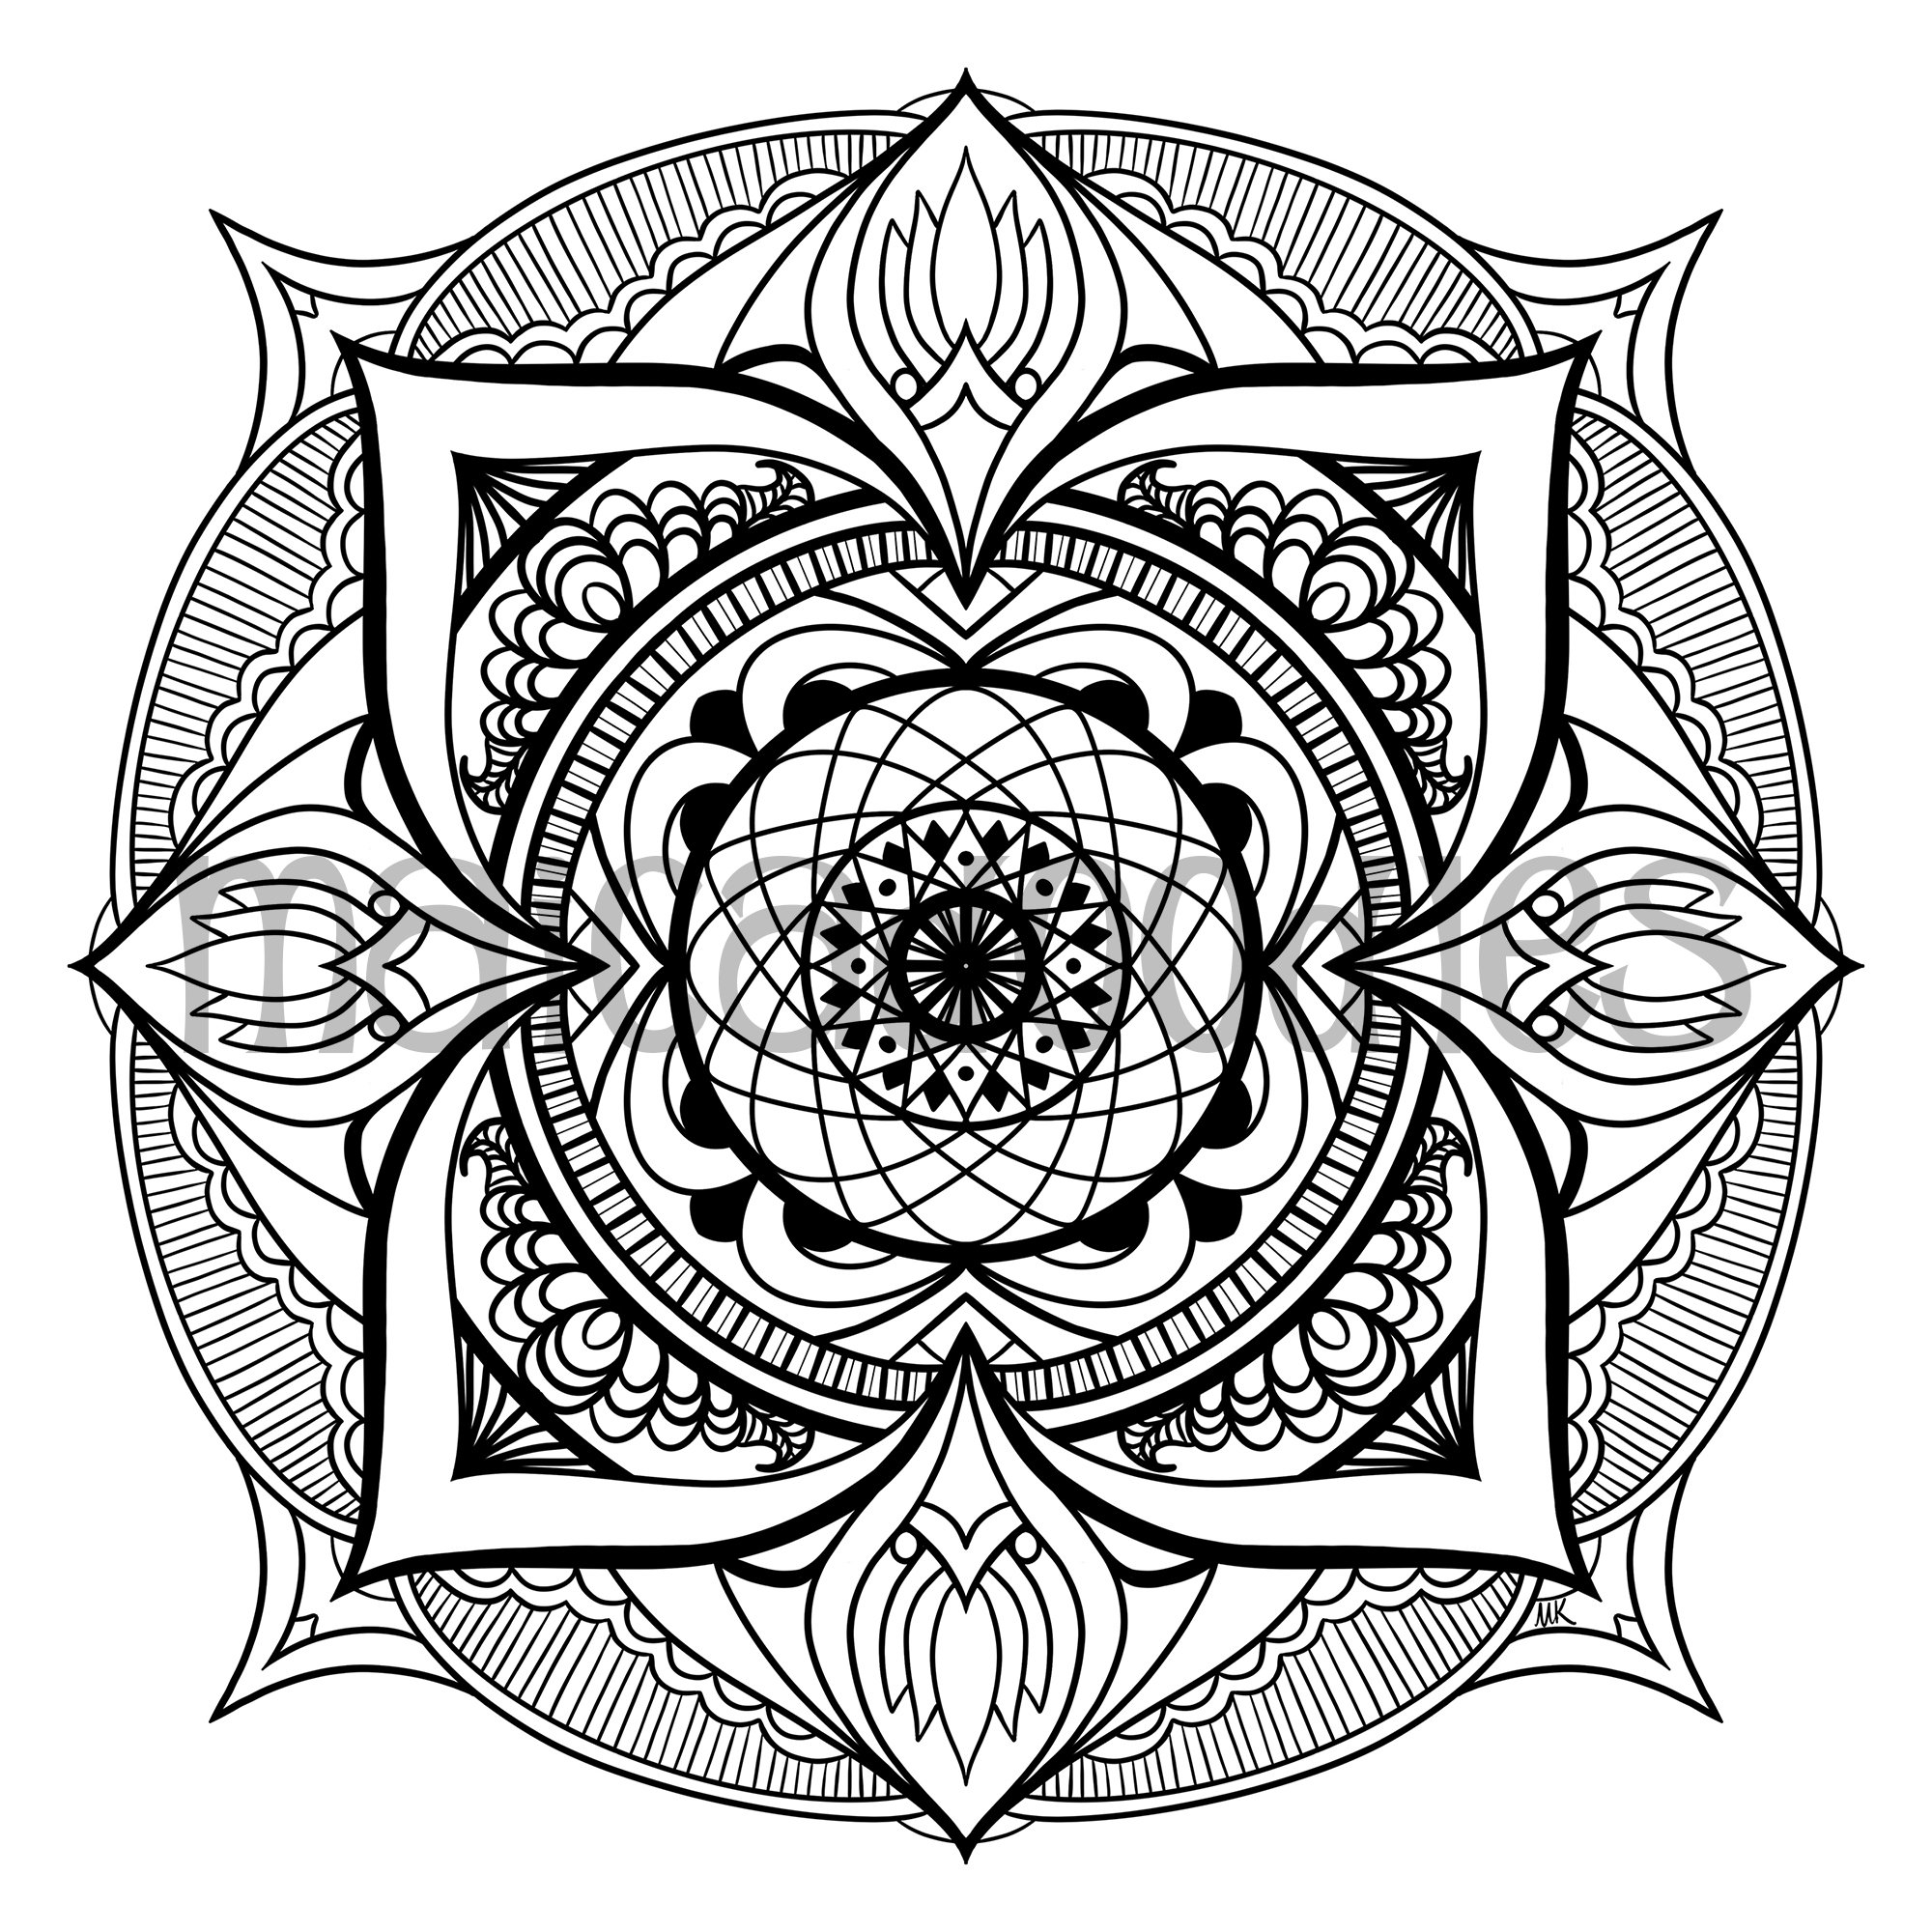 Mandala Coloring Book for Adults with Mandalas, Chakras, Yantras, Mehndi on  Thick Artist Paper with a Spiral Binding on the Top in Hardback by Victoria  Chukalina